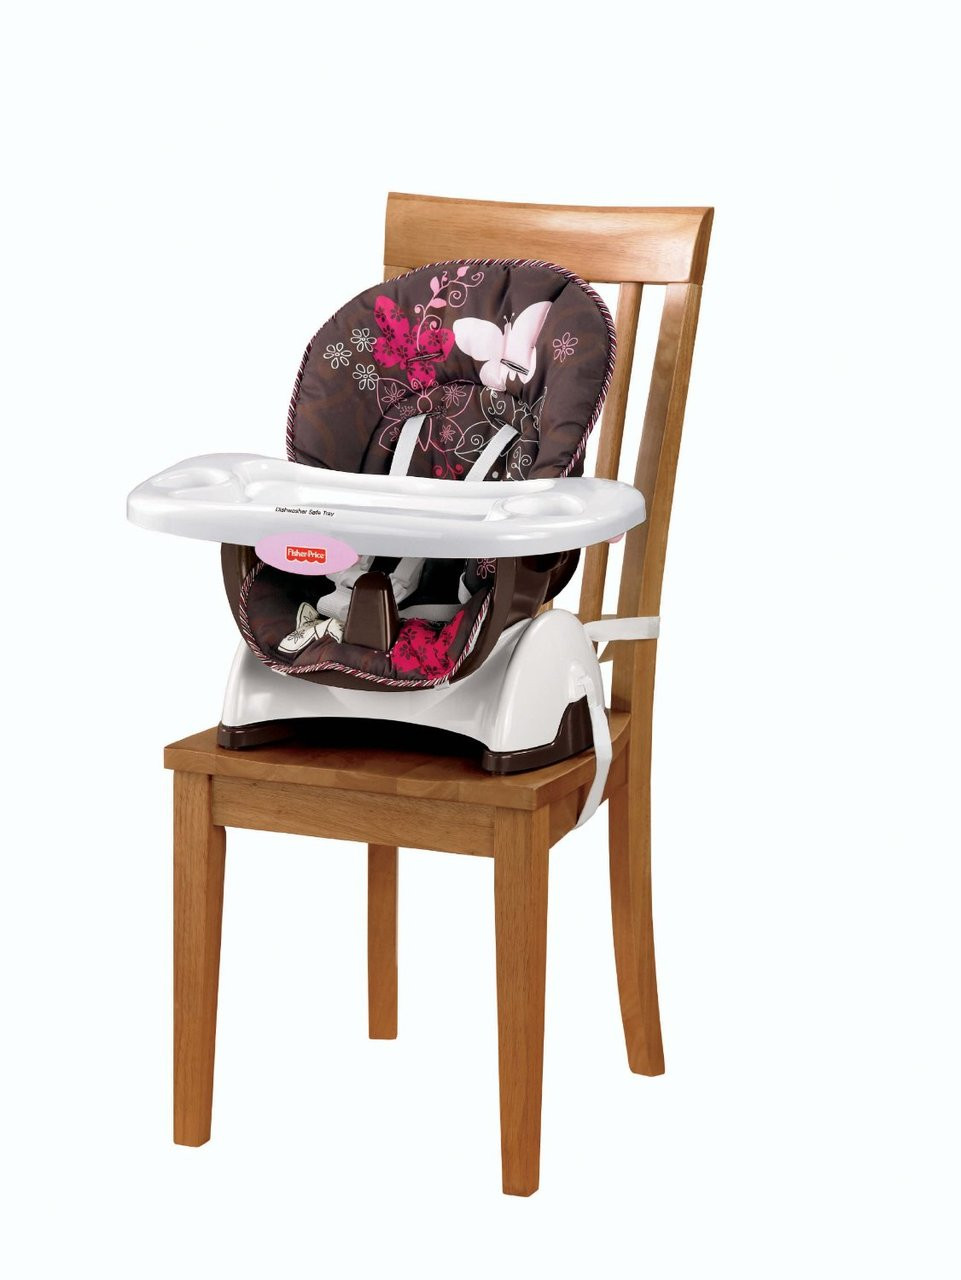 fisher price space saver high chair girl